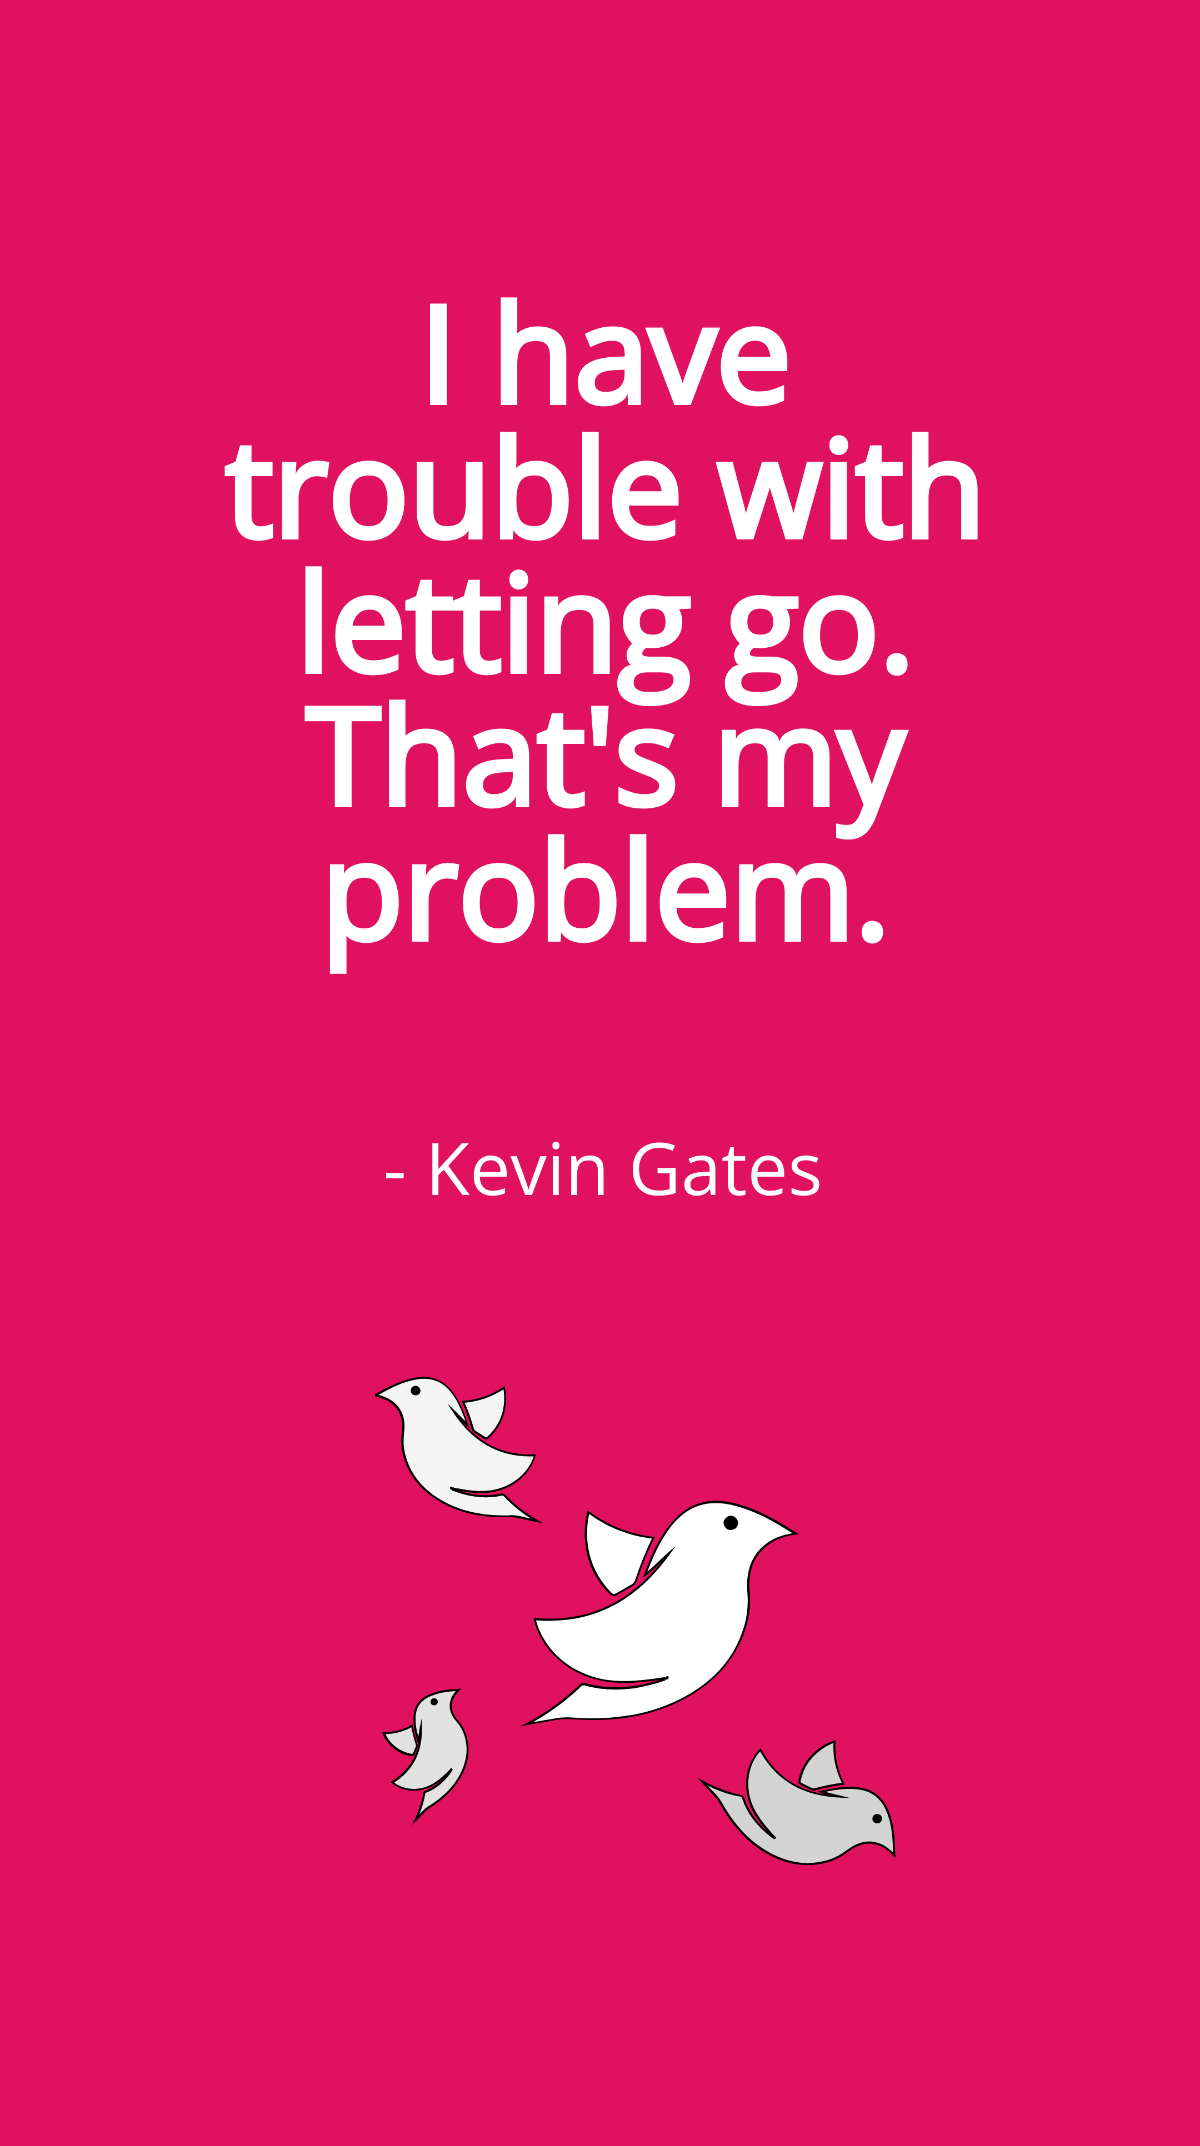 Kevin Gates - I have trouble with letting go. That's my problem. Template